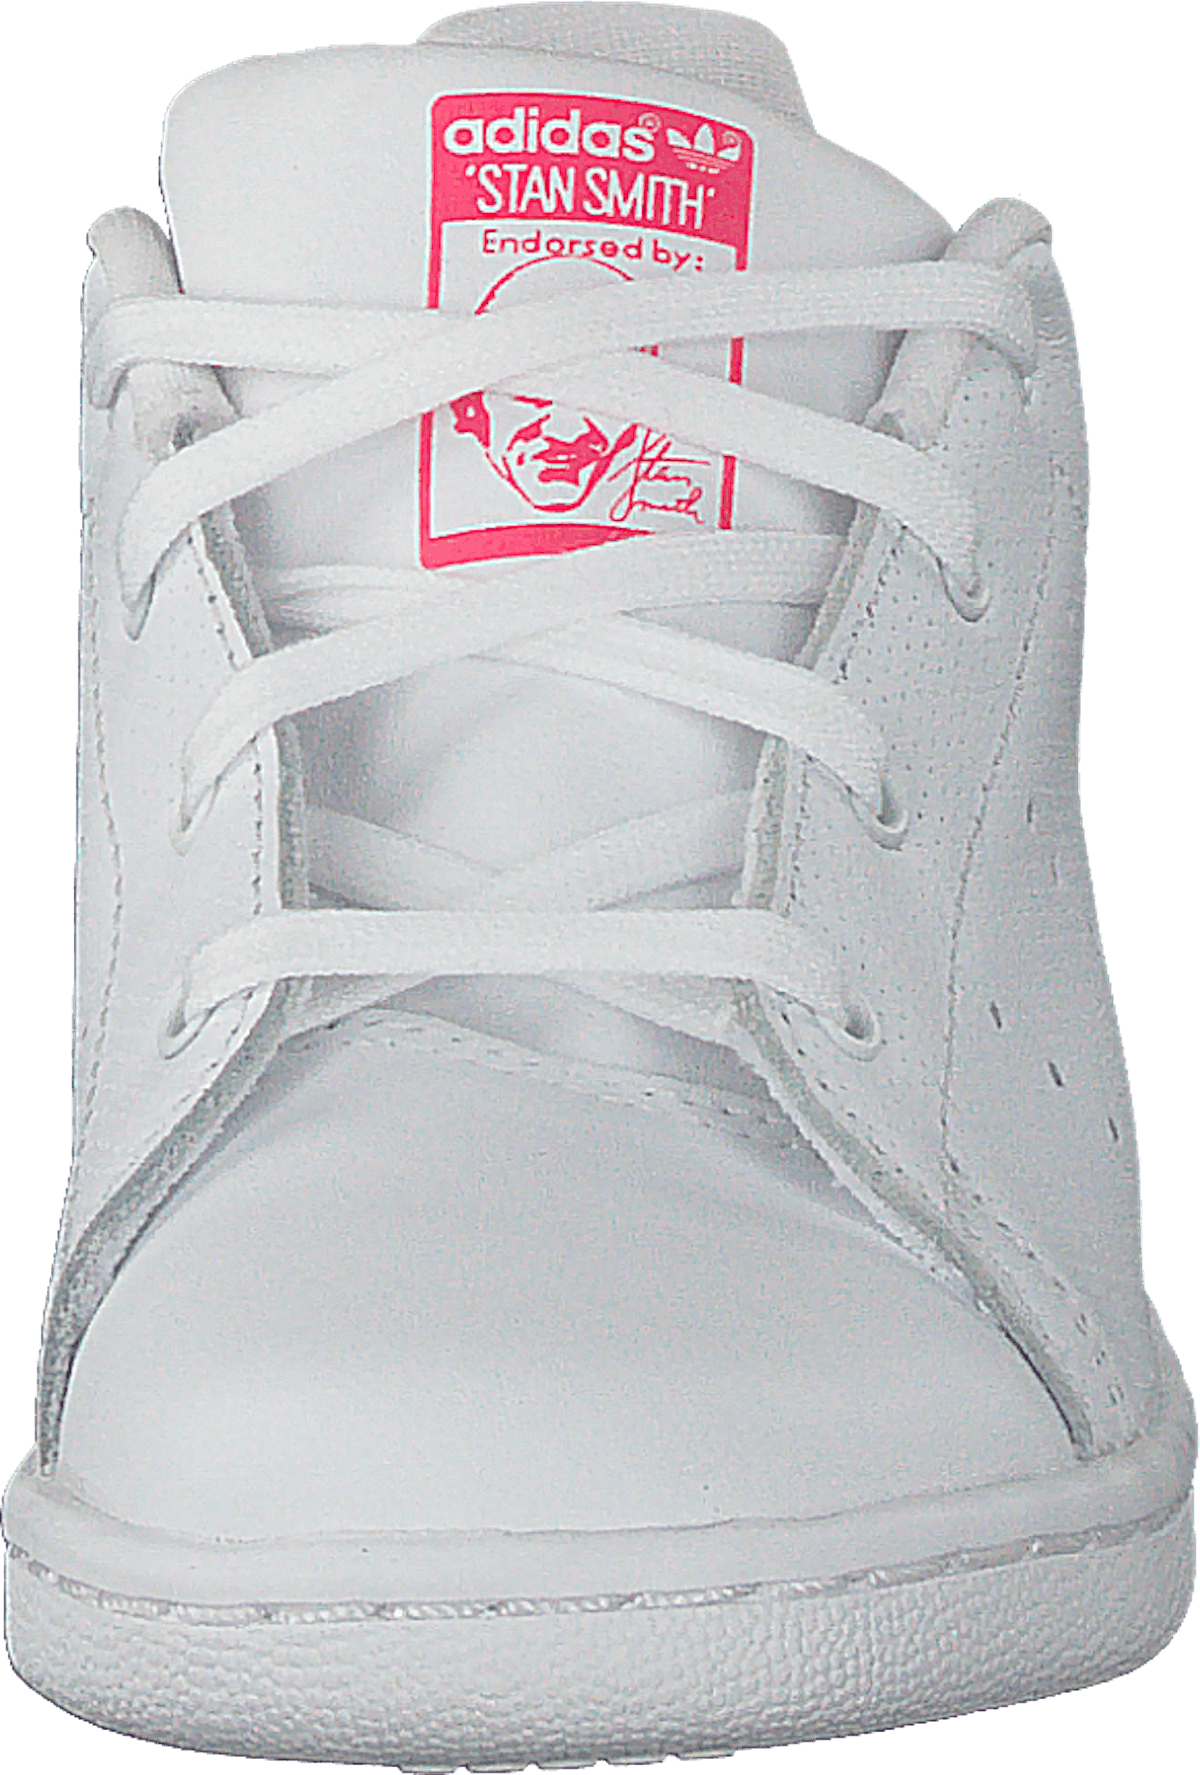 Stan Smith I Ftwr White/Real Pink S18